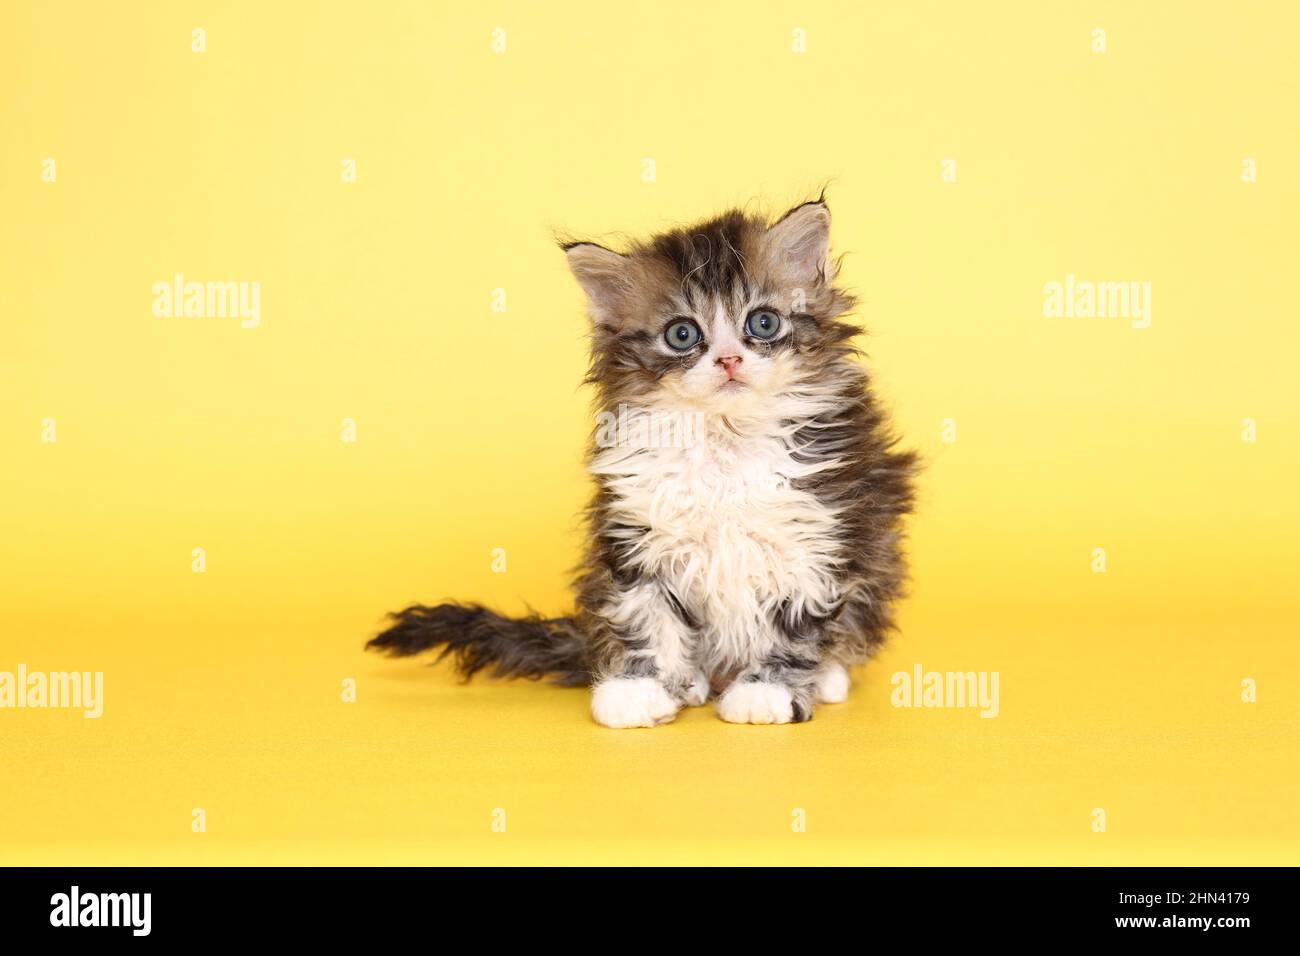 Selkirk Rex. Kitten sitting. Studio picture against a yellow background. Germany Stock Photo